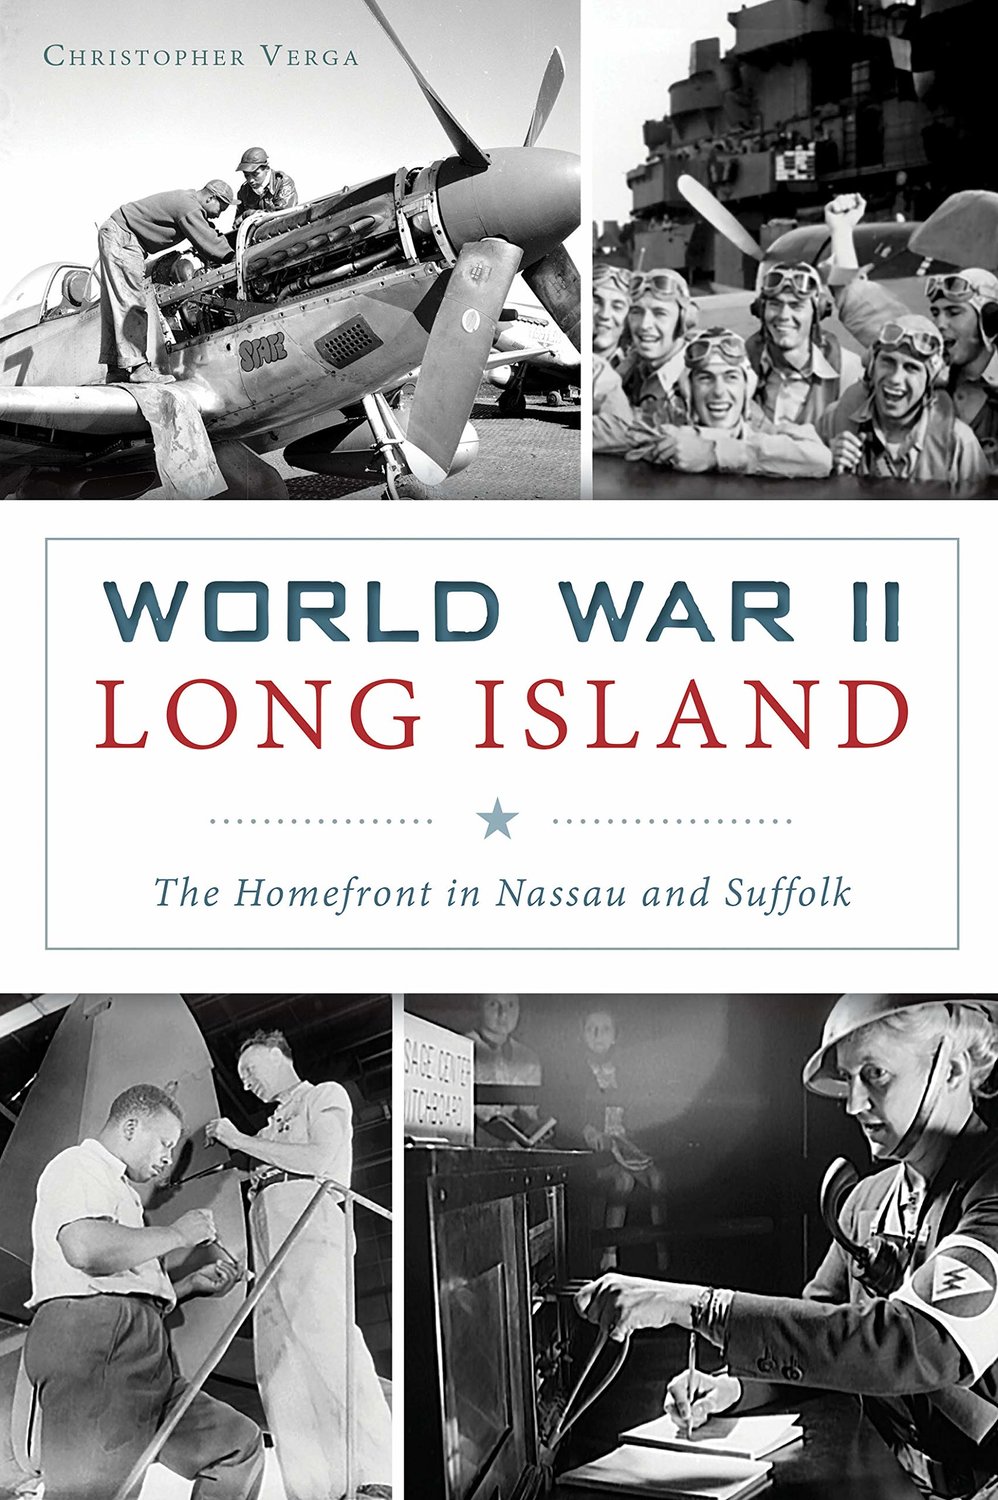 Dr. Christopher Verga wrote the book “World War II Long Island: The Homefront” in Nassau and Suffolk and presented on the book at the most recent Bay Shore Historical Society meeting.